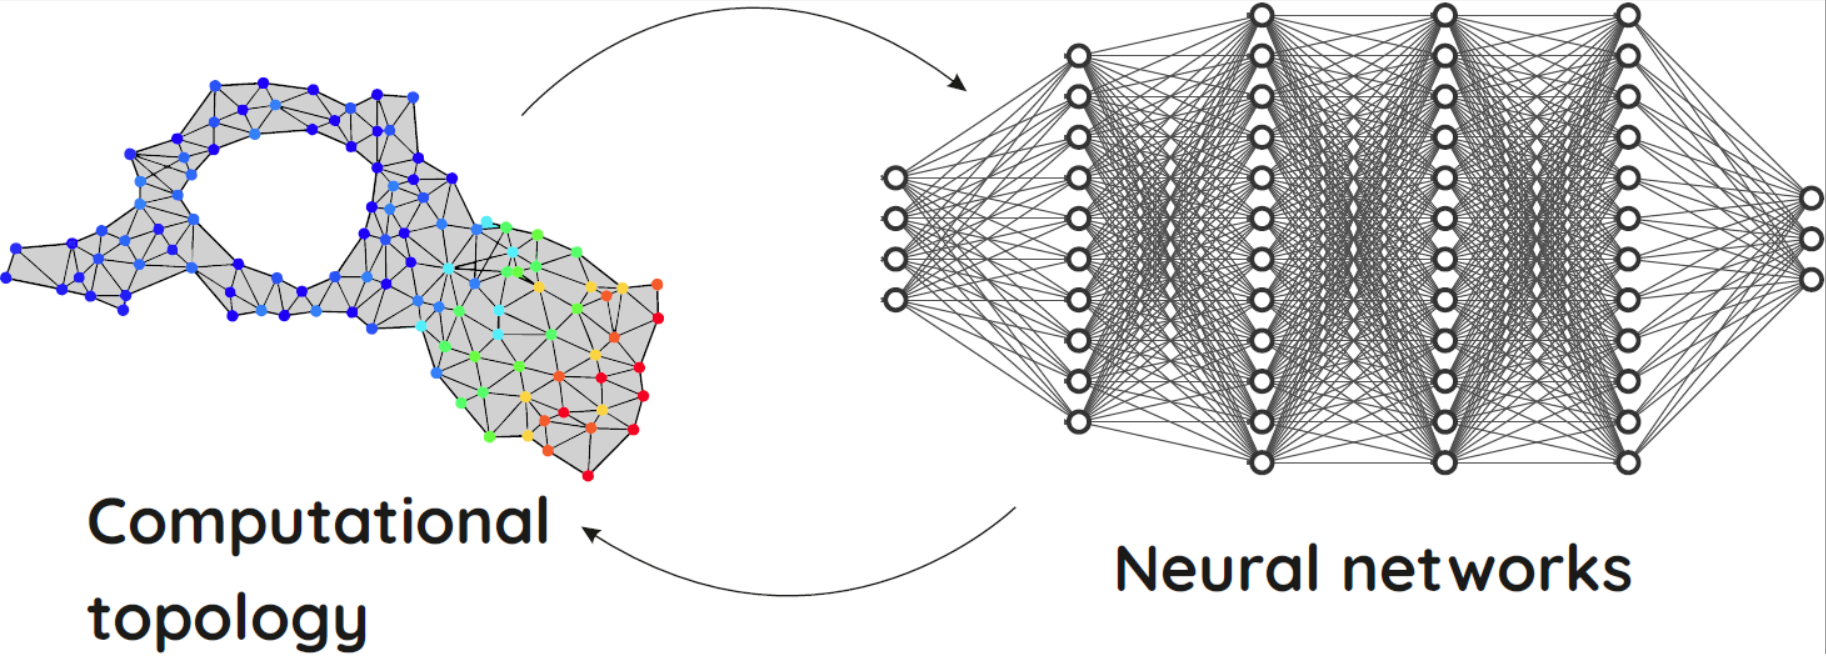 Neural networks and computational topology